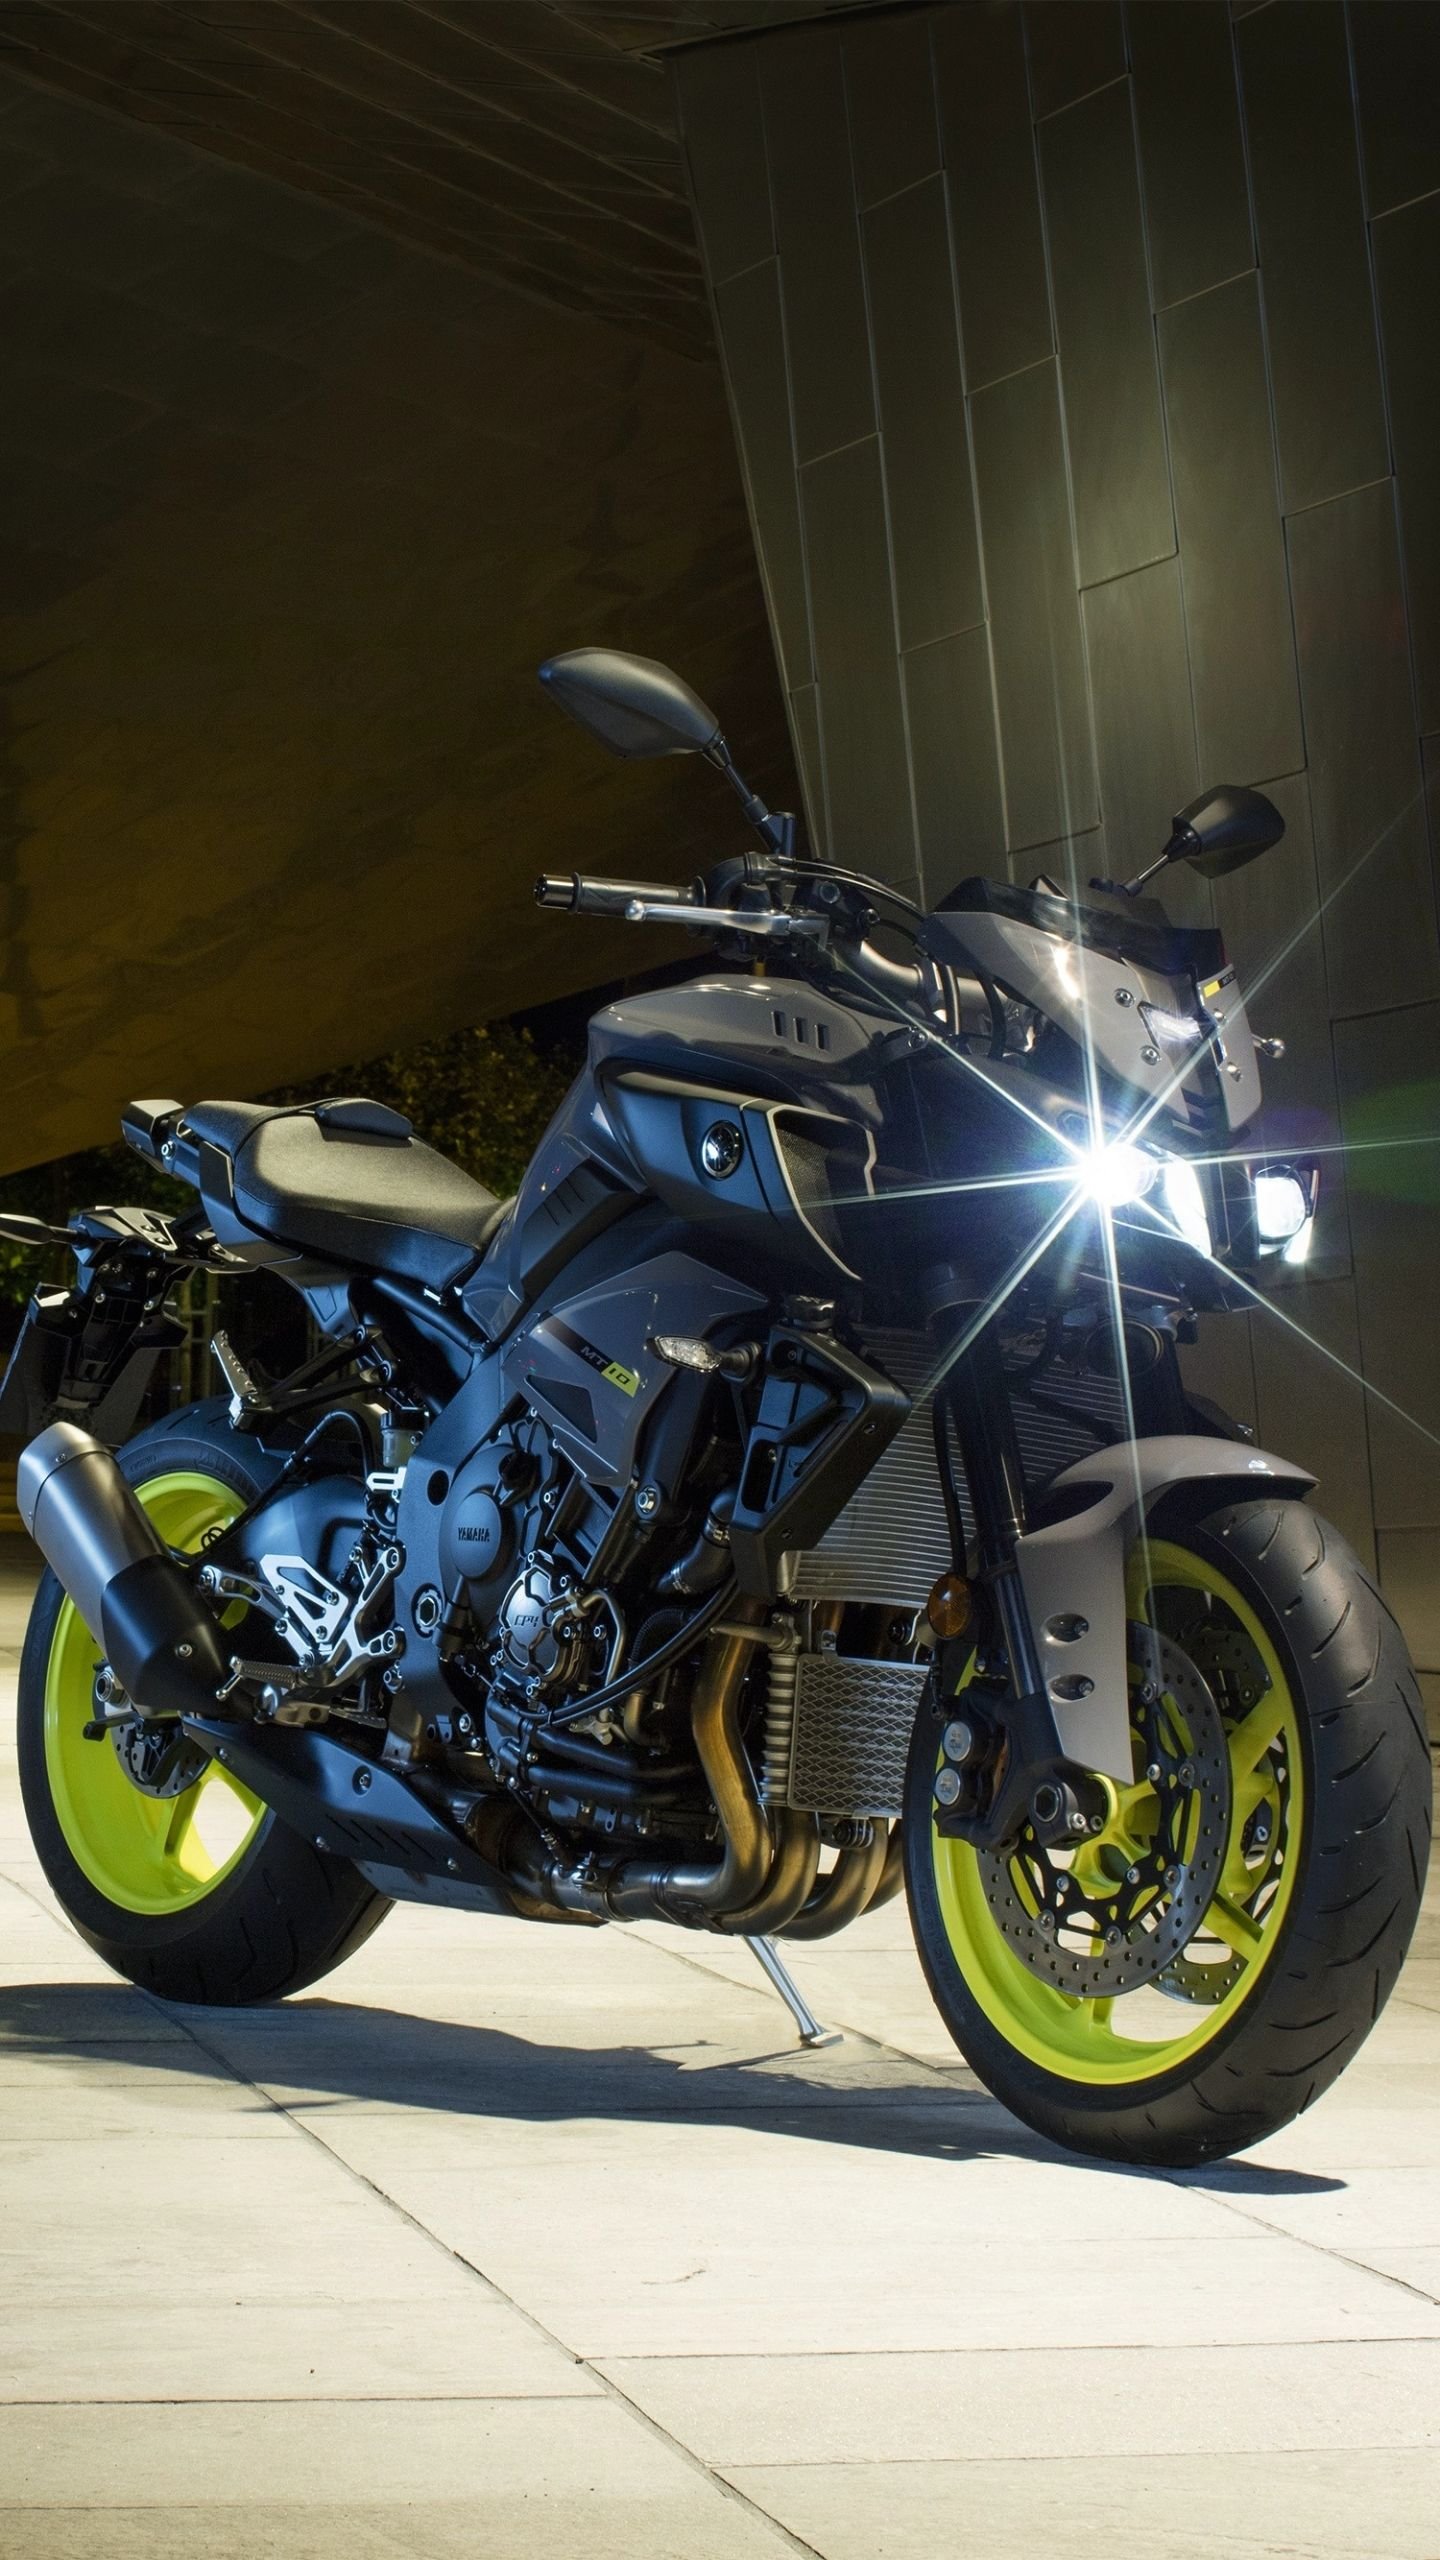 Mobile wallpaper Night Yamaha Motorcycle Vehicle Vehicles Yamaha Mt 10  1139375 download the picture for free